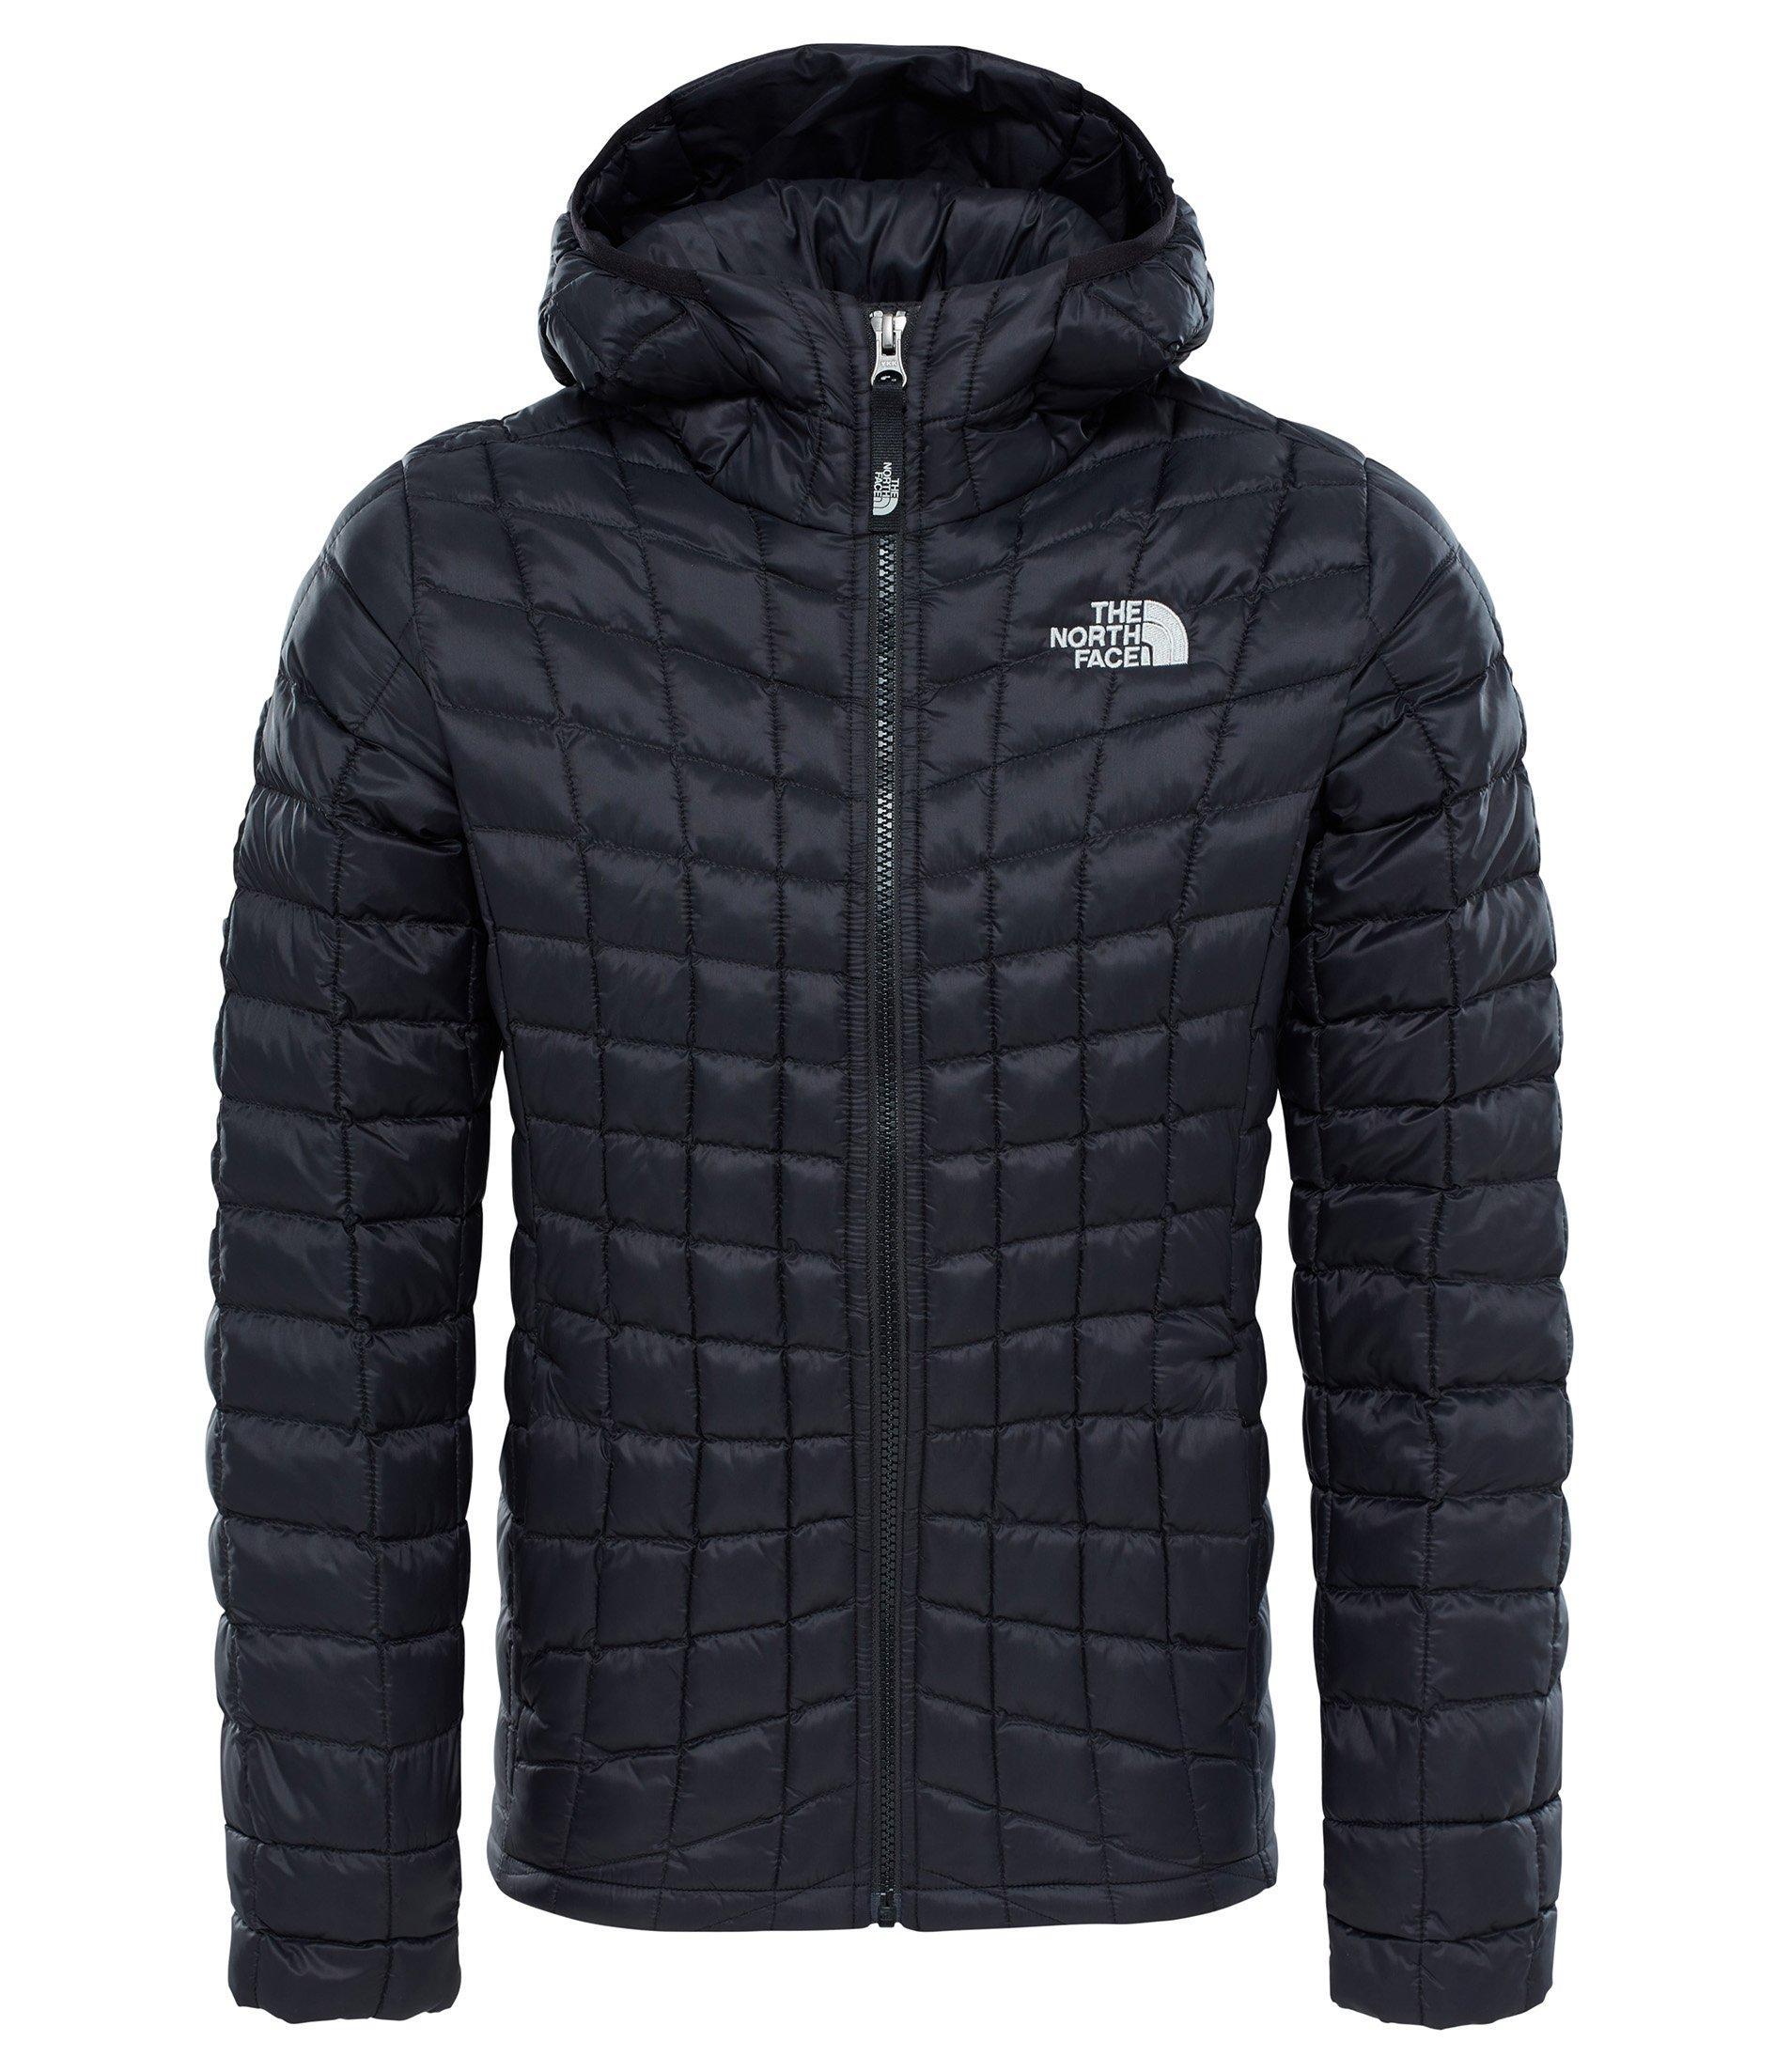 The North Face ThermoBall Girls Jacket 